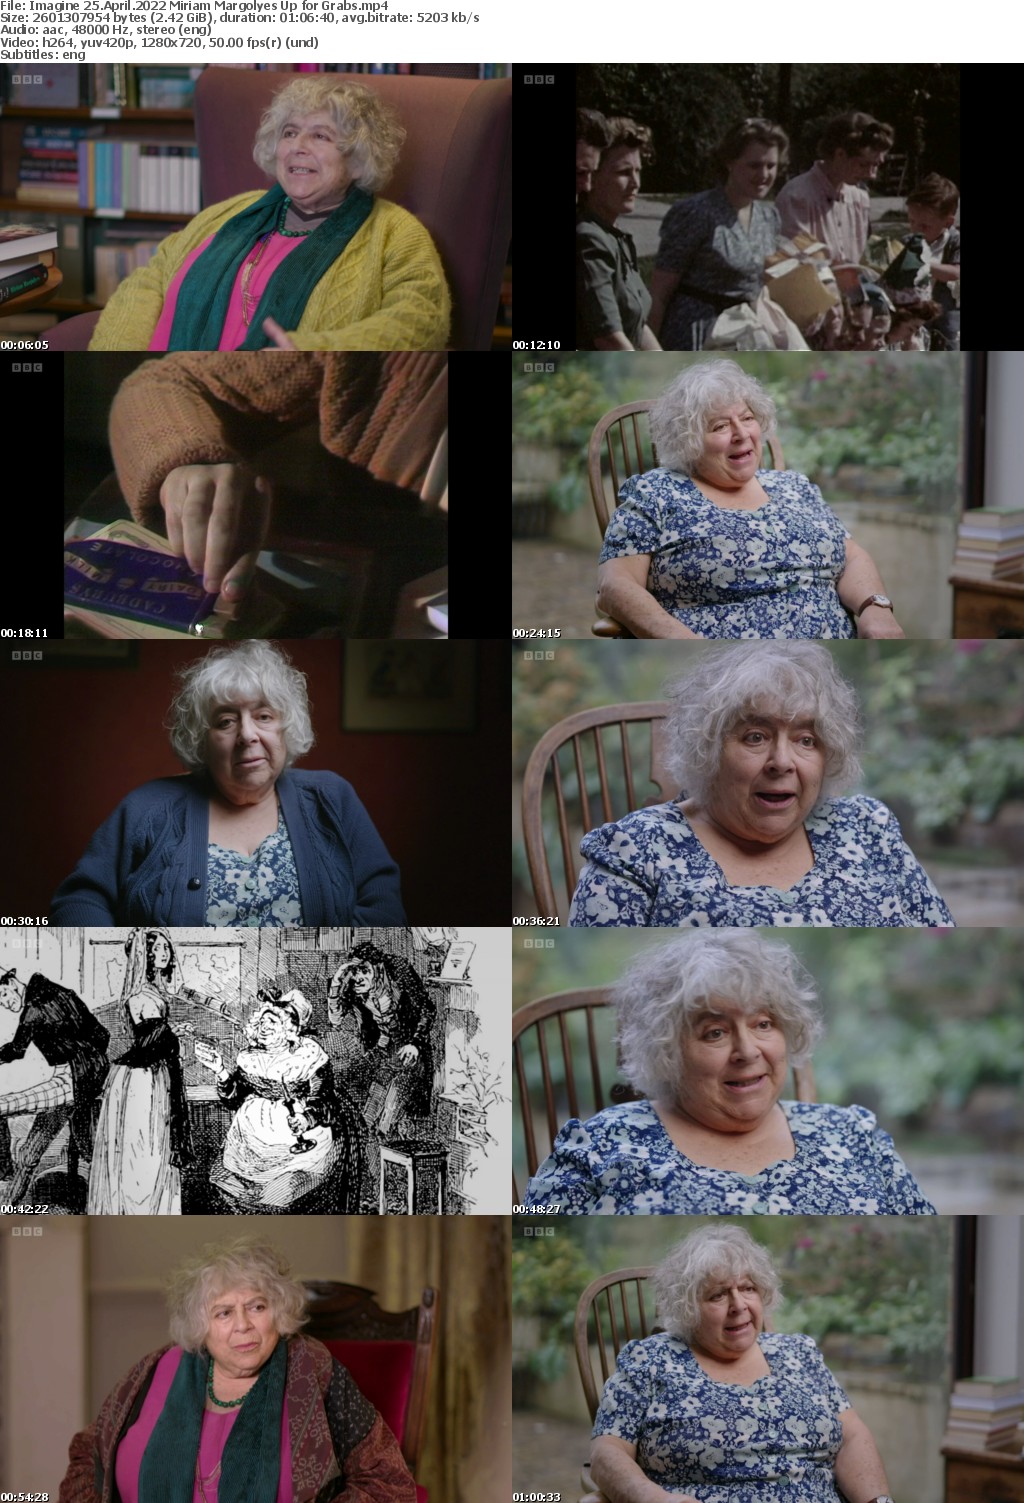 Imagine 25 April 2022 Miriam Margolyes Up for Grabs (1280x720p HD, 50fps, soft Eng subs)